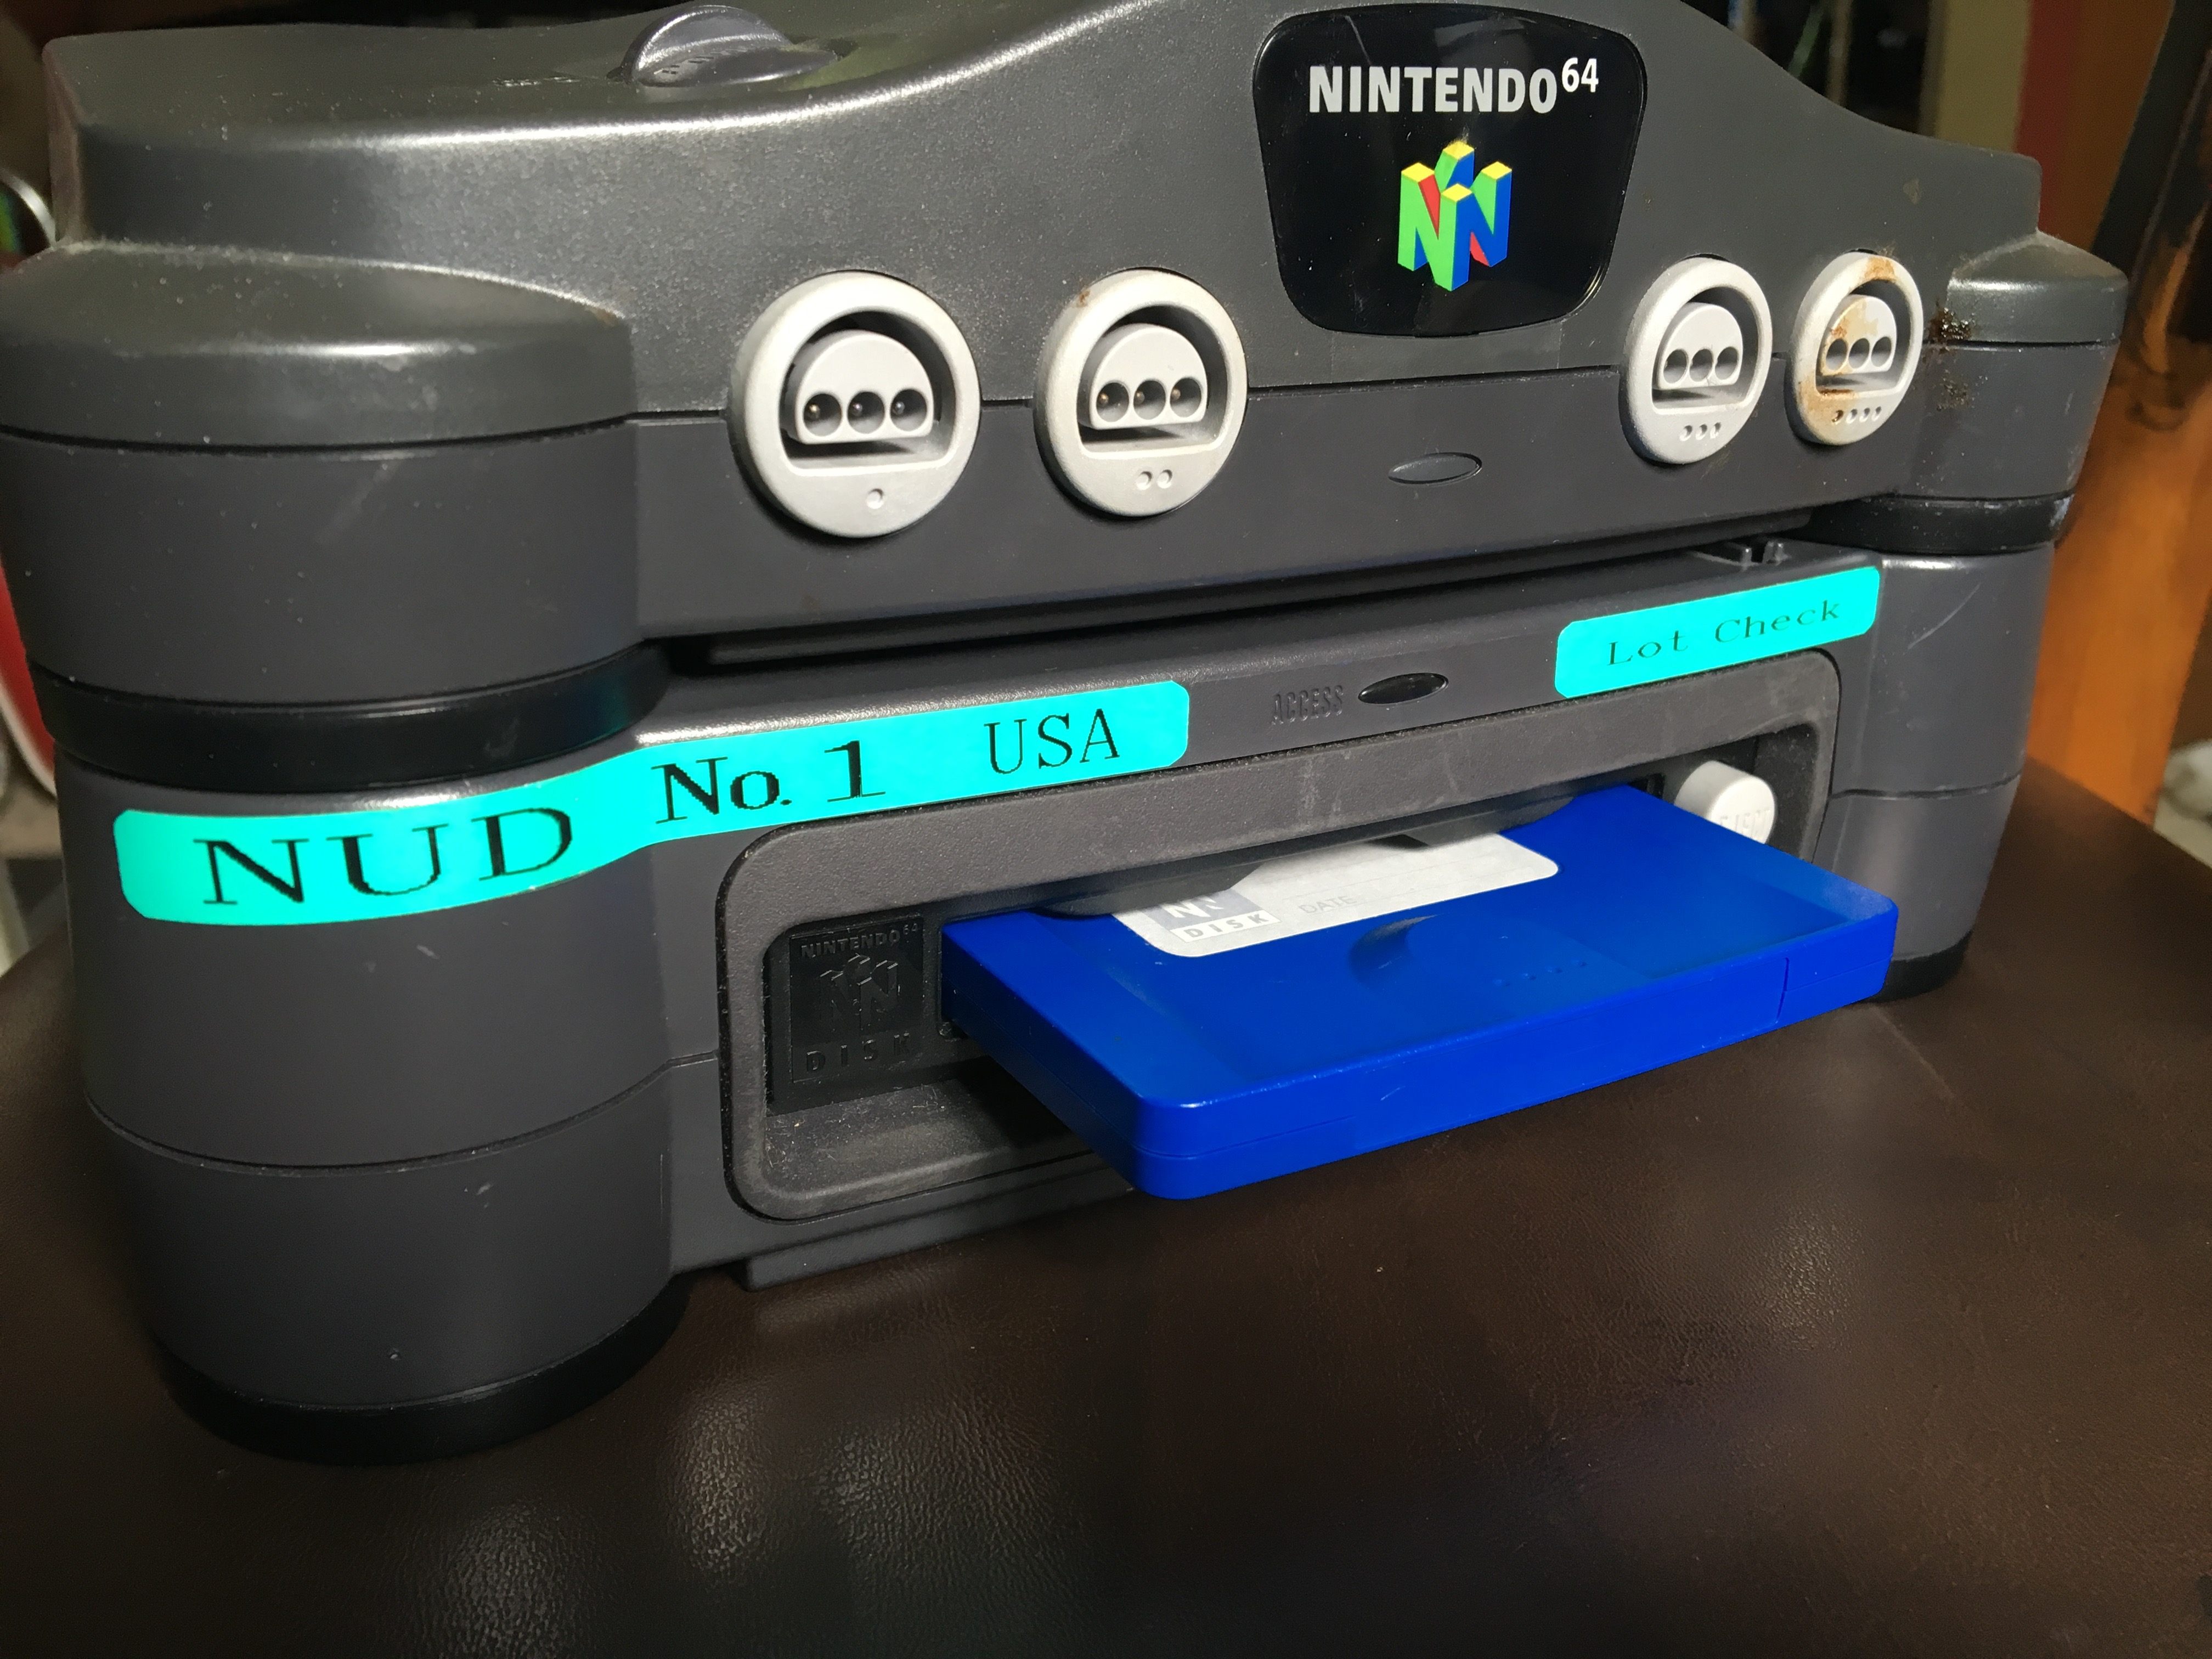 Found: Vintage and Extremely Rare Version Nintendo 64 Console - Obscura